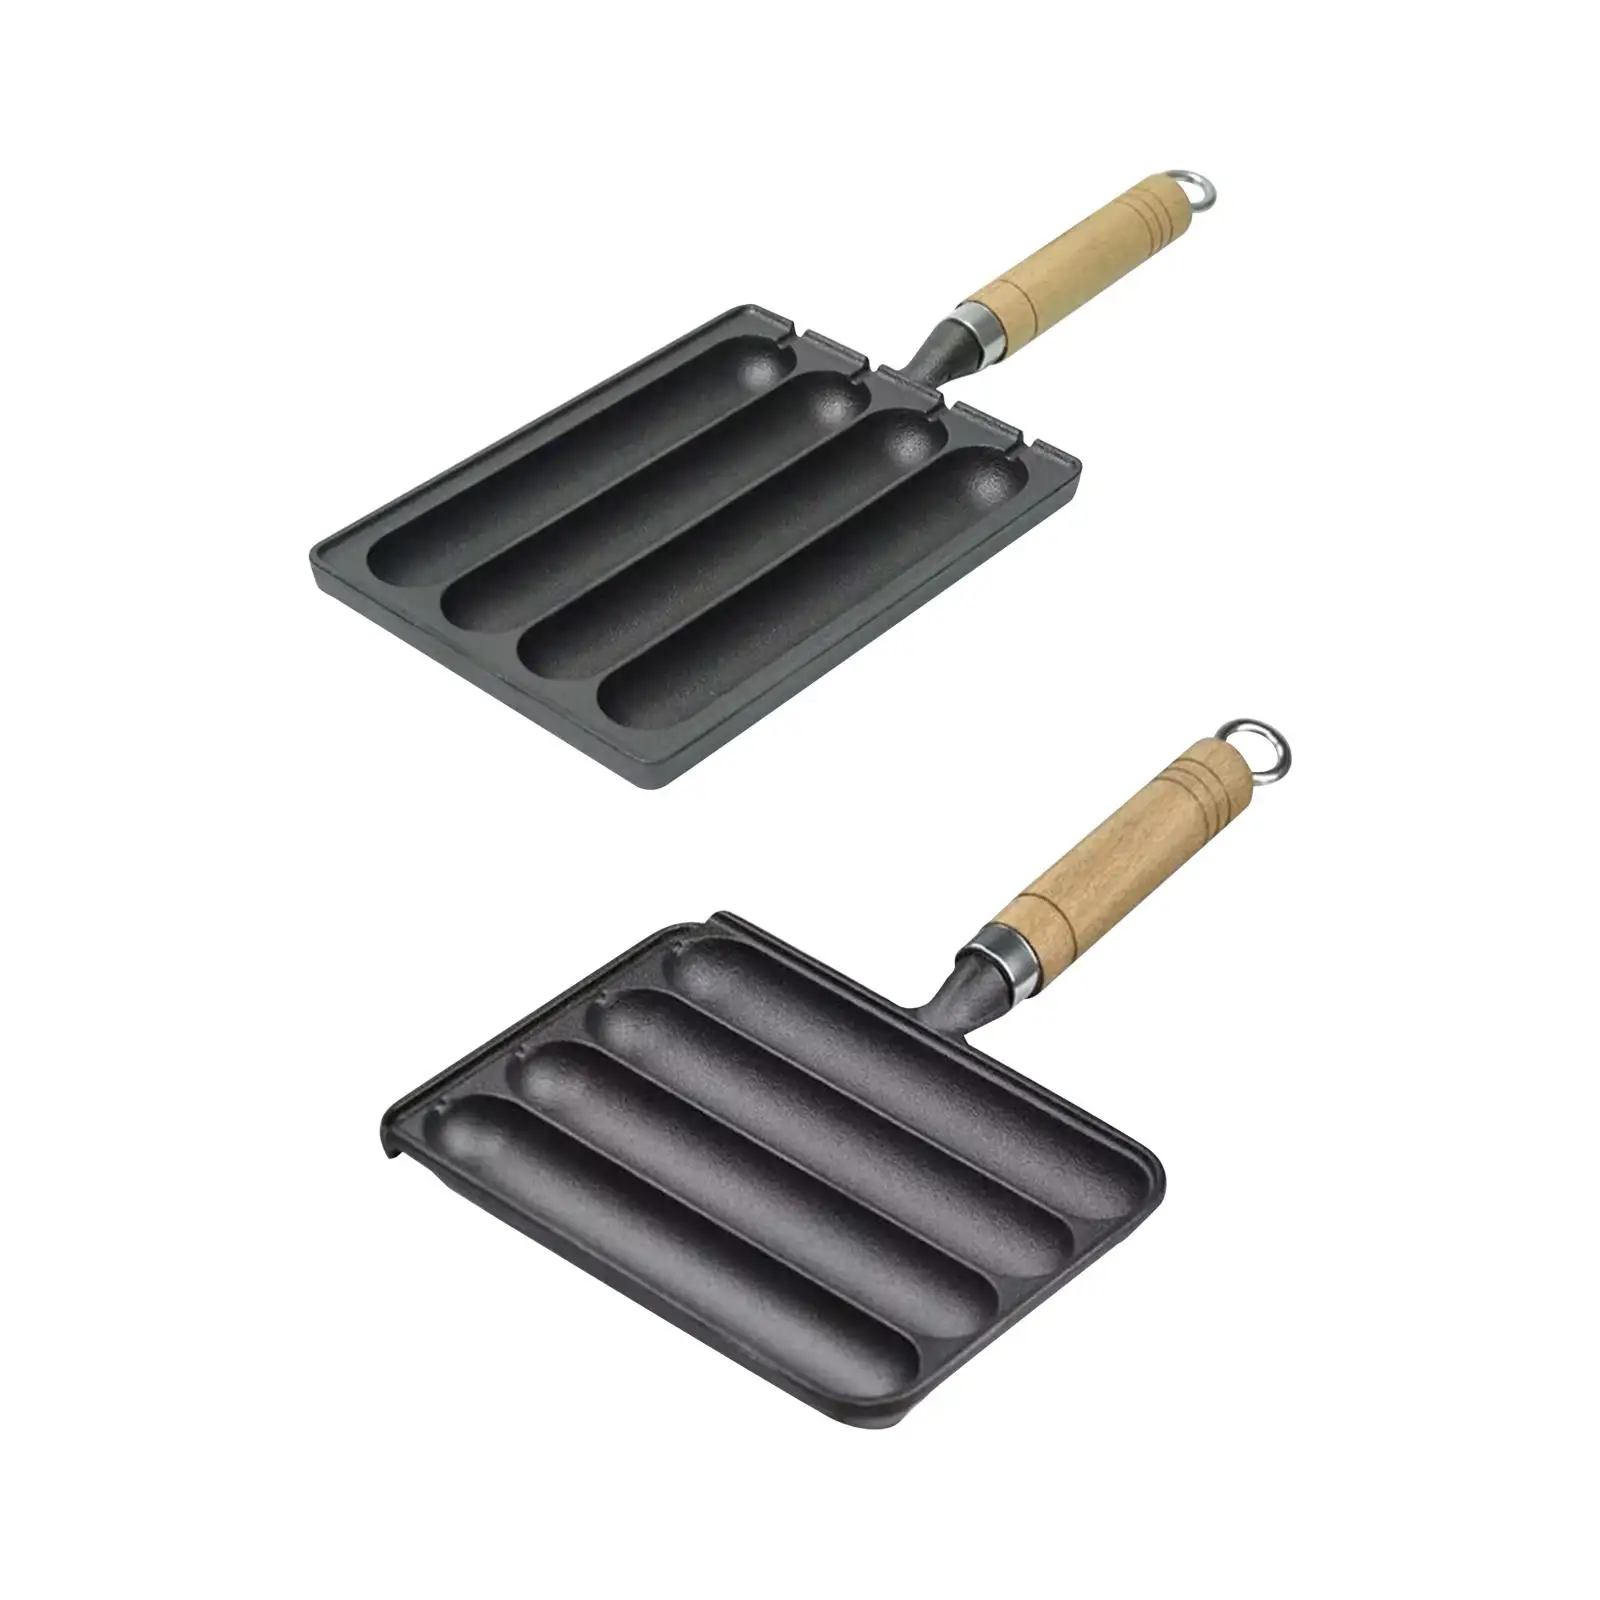 Sausage Pan Homemade 4 Cavity Corn Dog Grill Pan for Kitchen Outdoor Breakfast